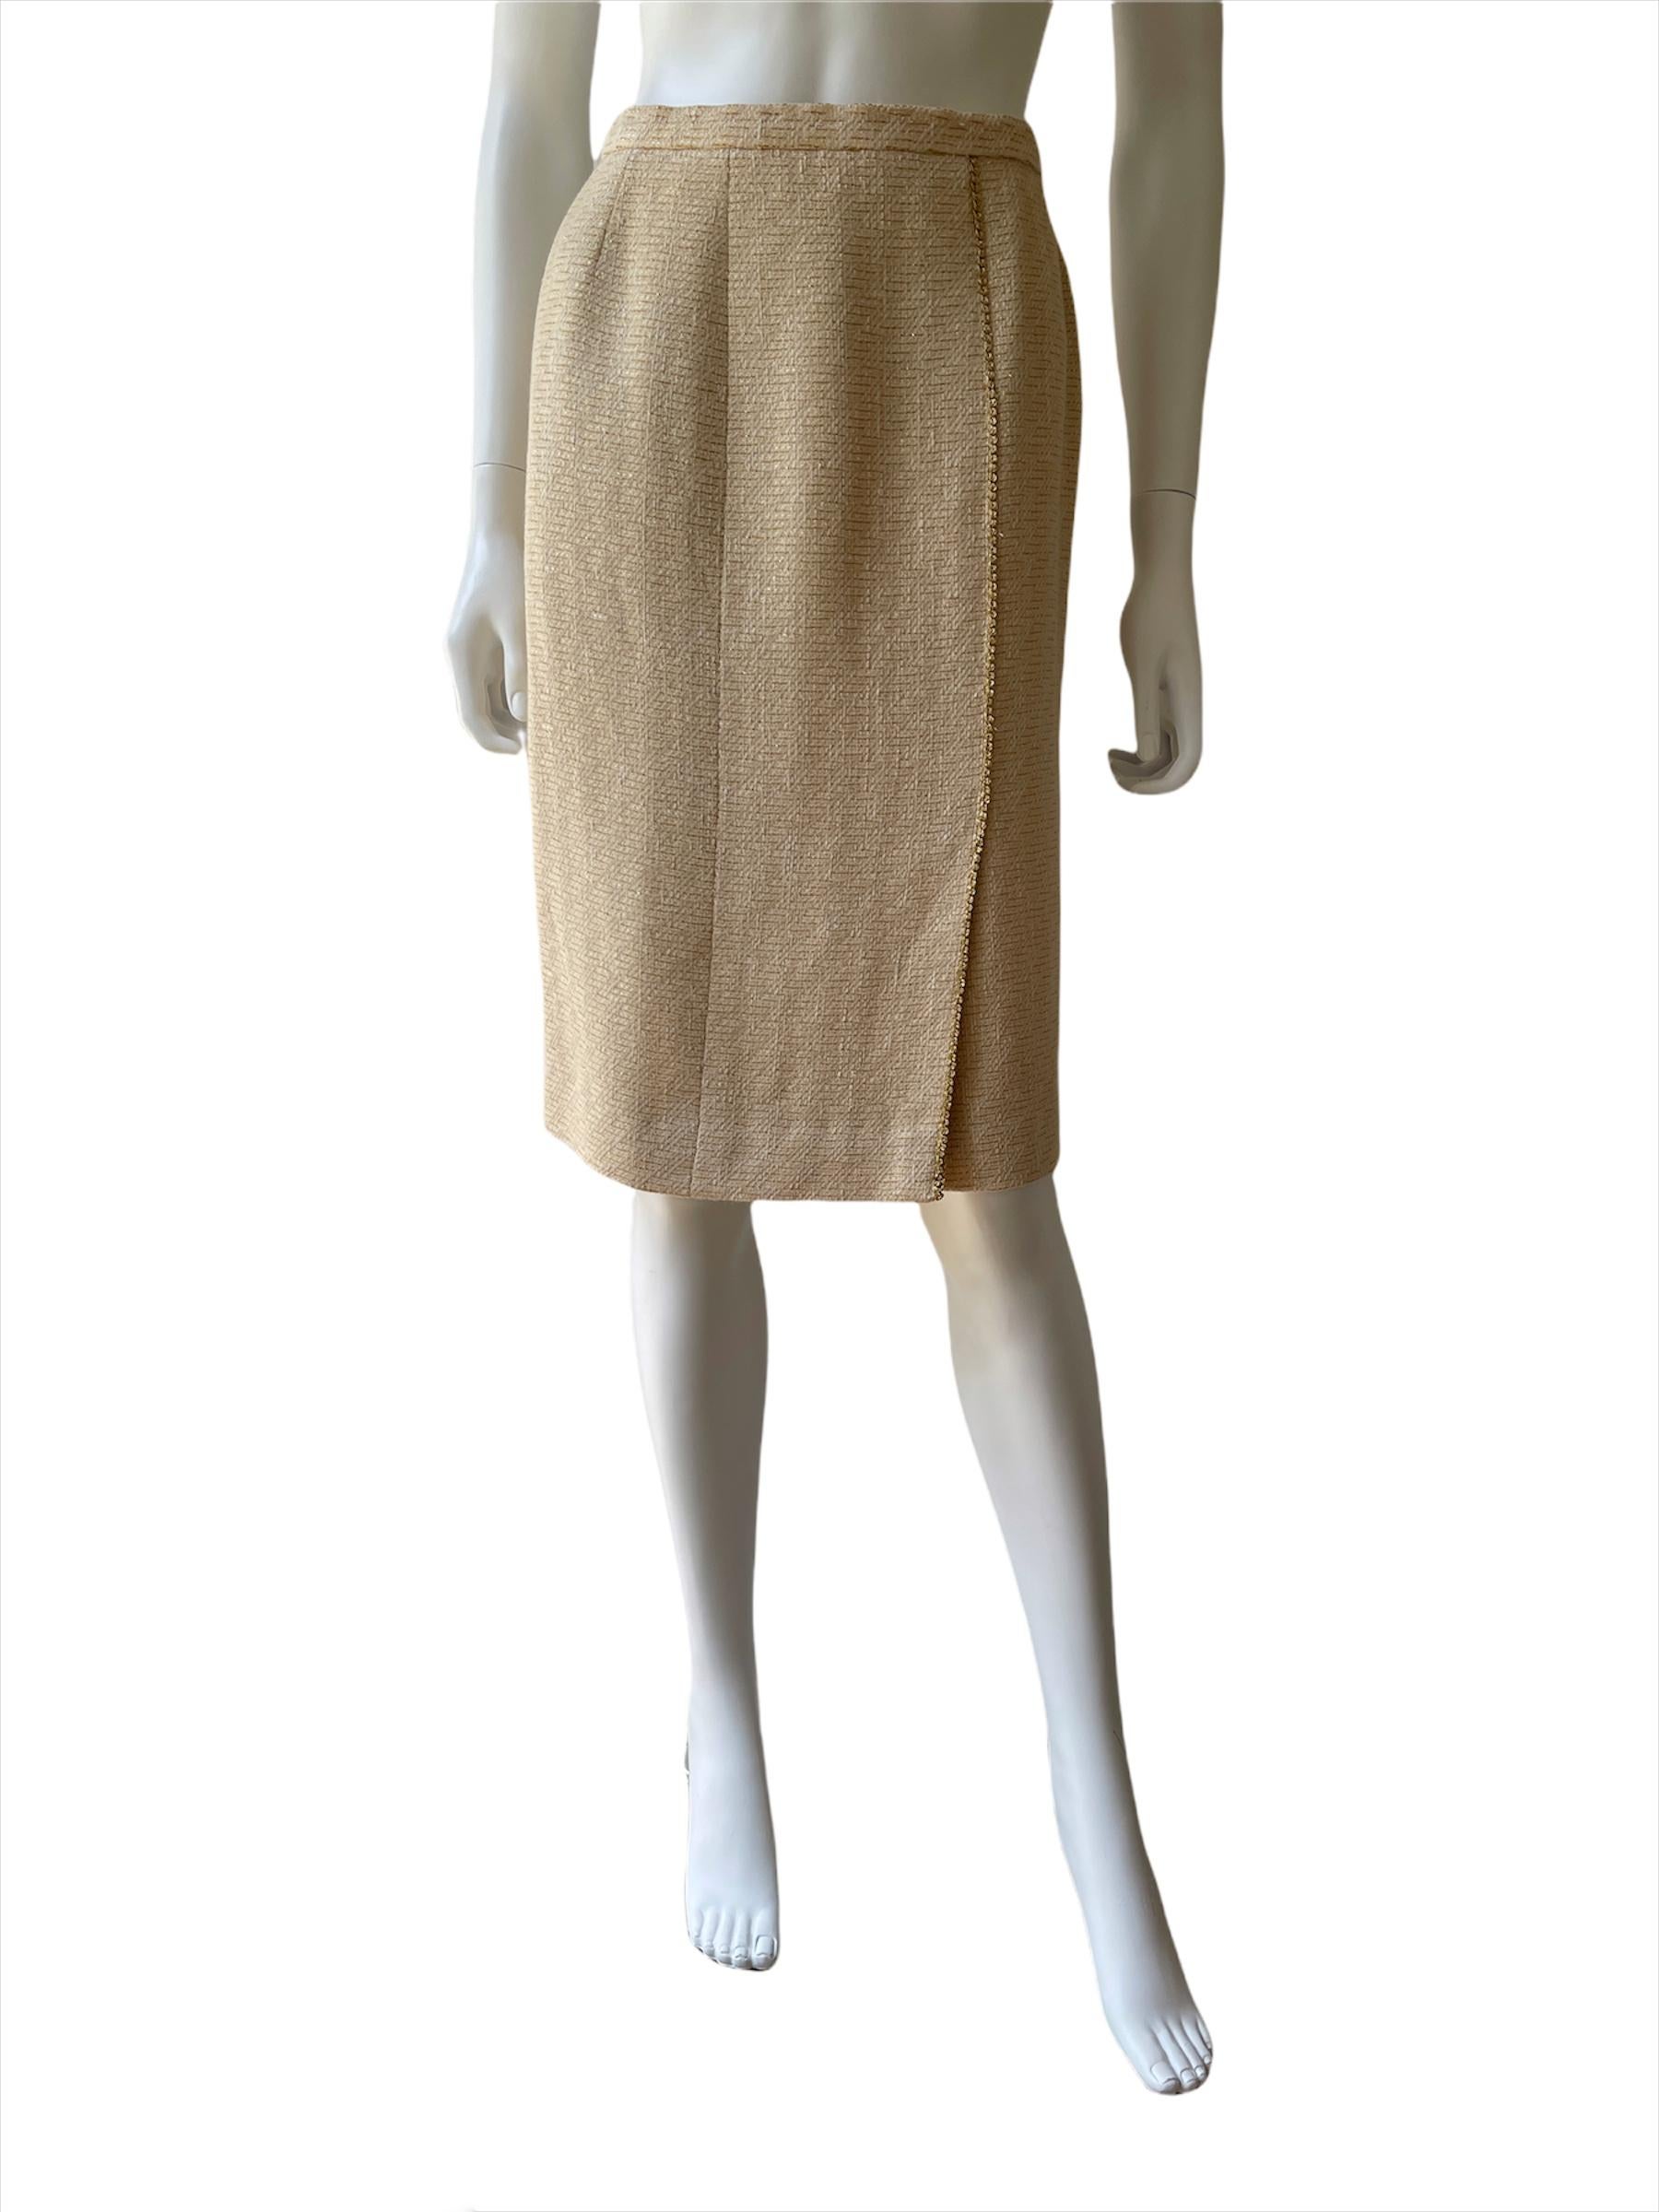 Vintage Chanel Tweed Skirt Suit 2pieces Set Ivory and Gold  5